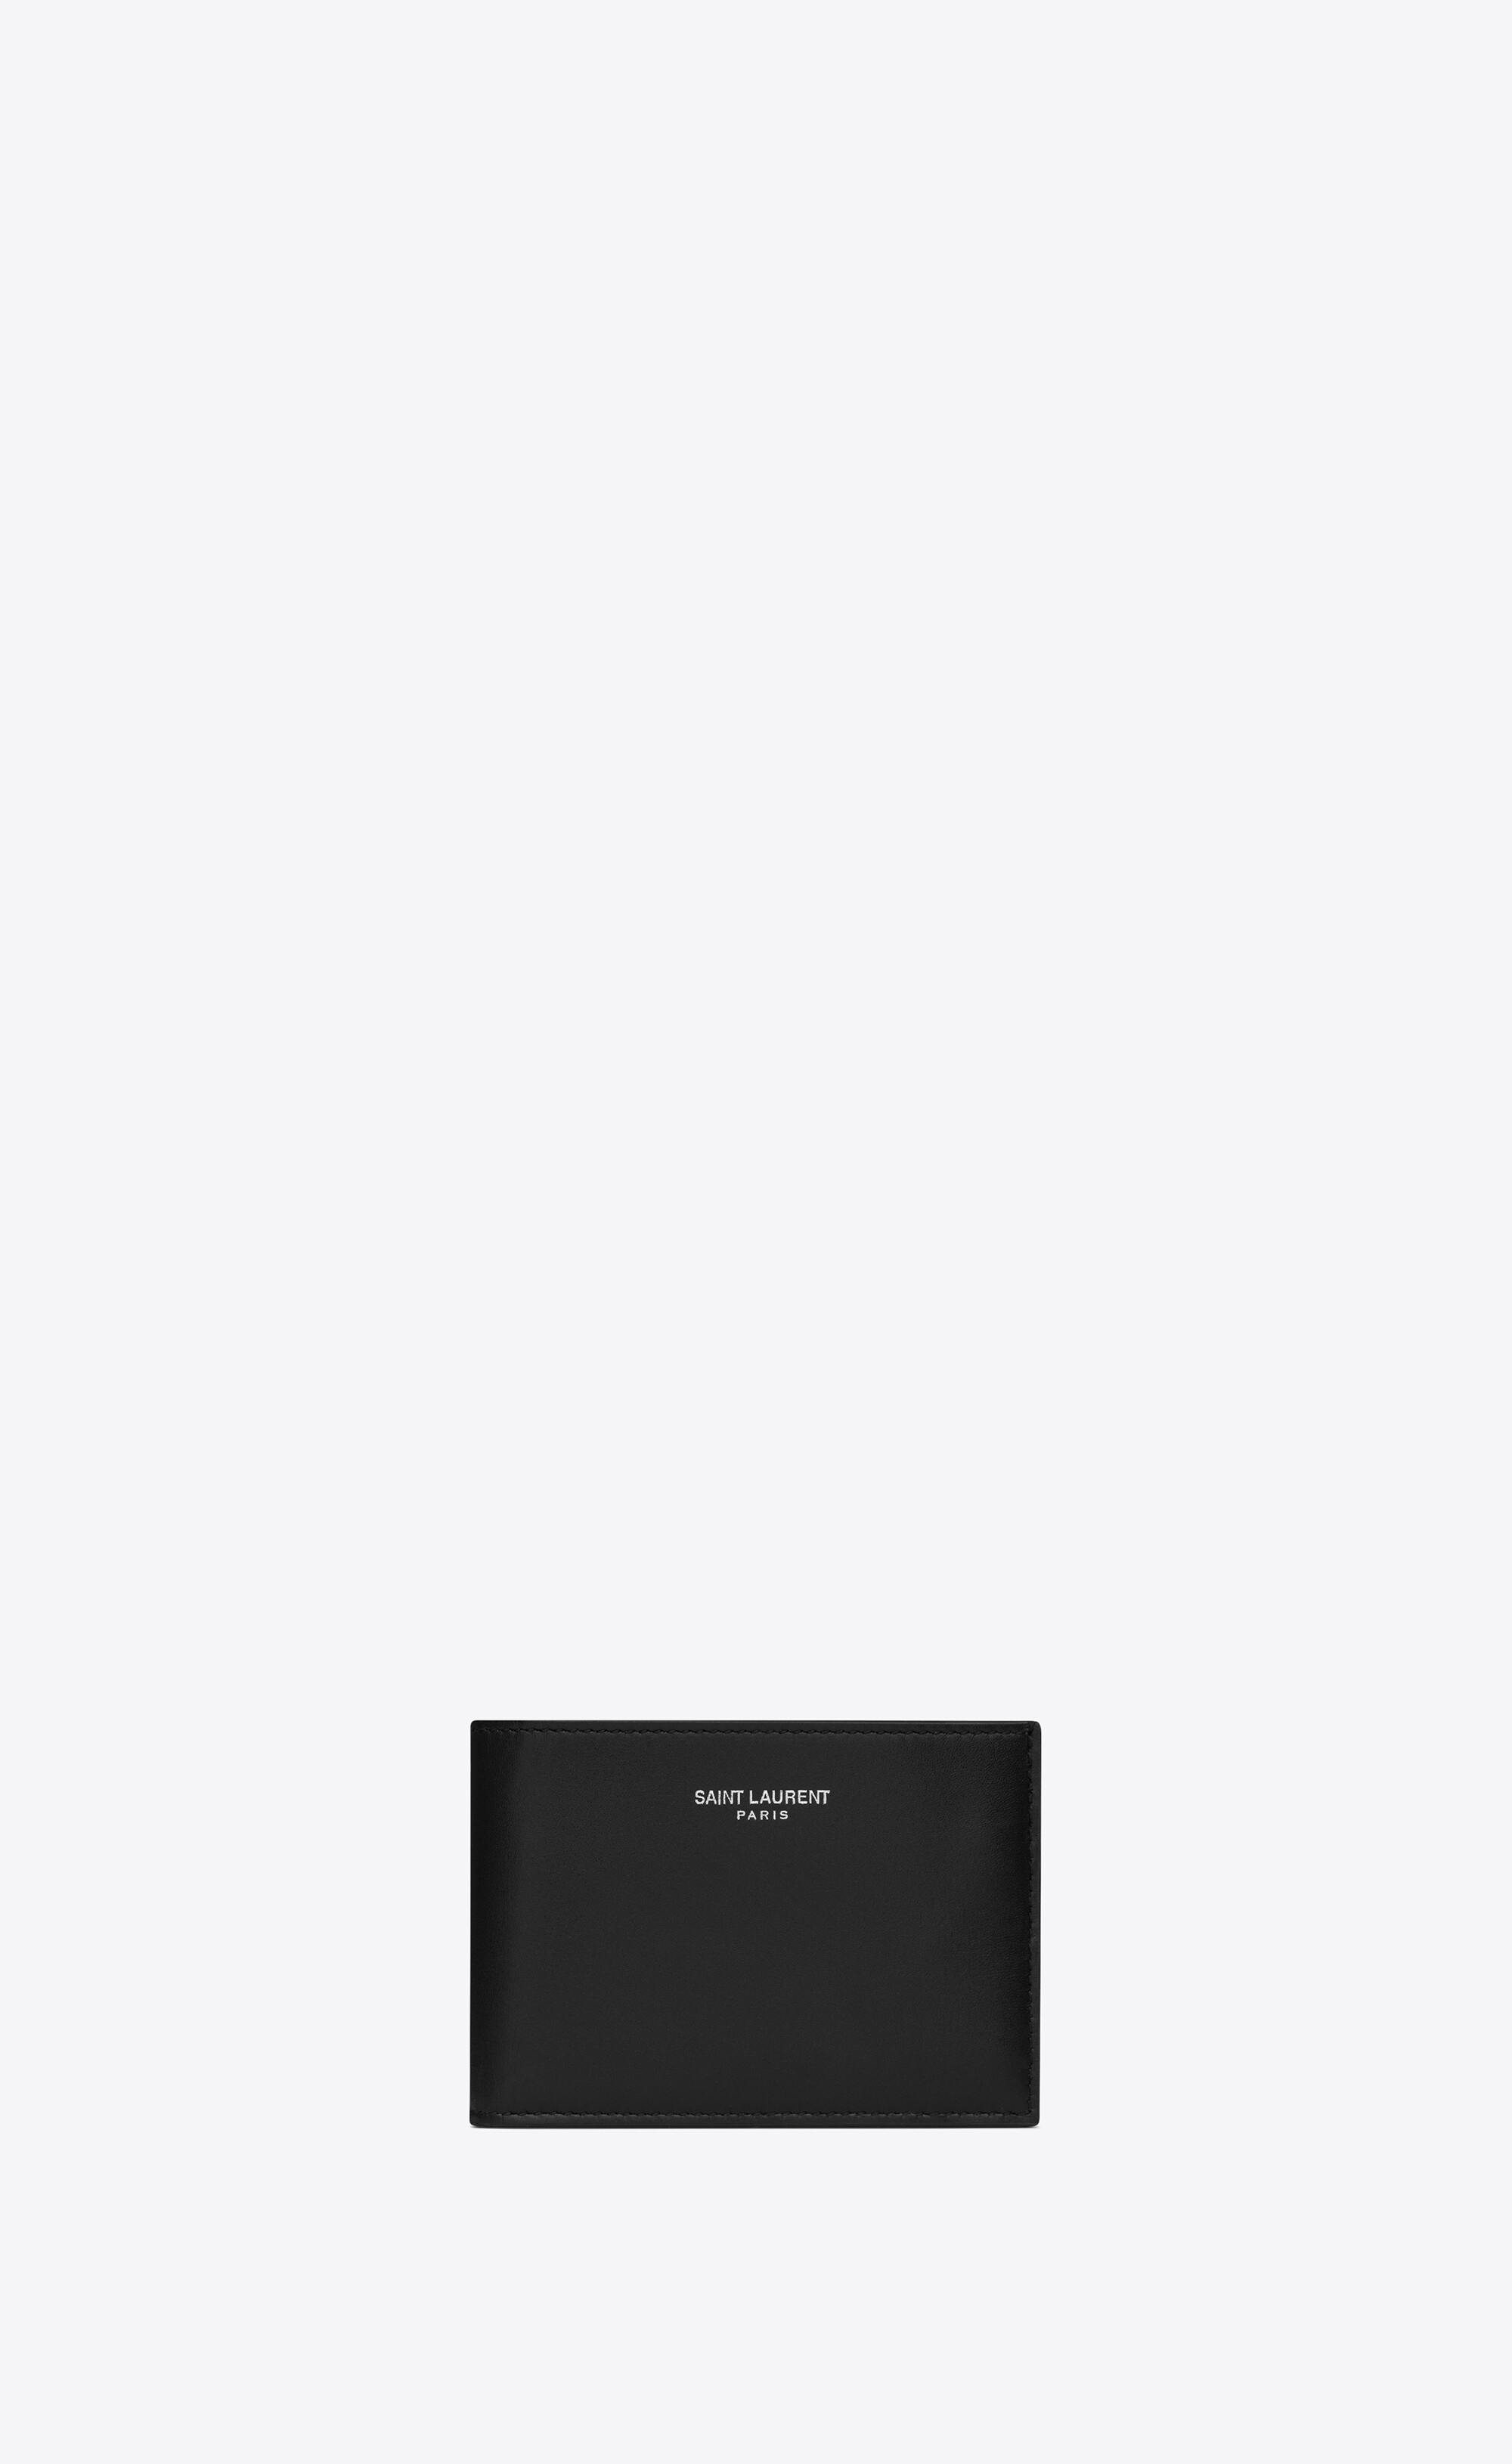 saint laurent paris compact card case in smooth leather - 1